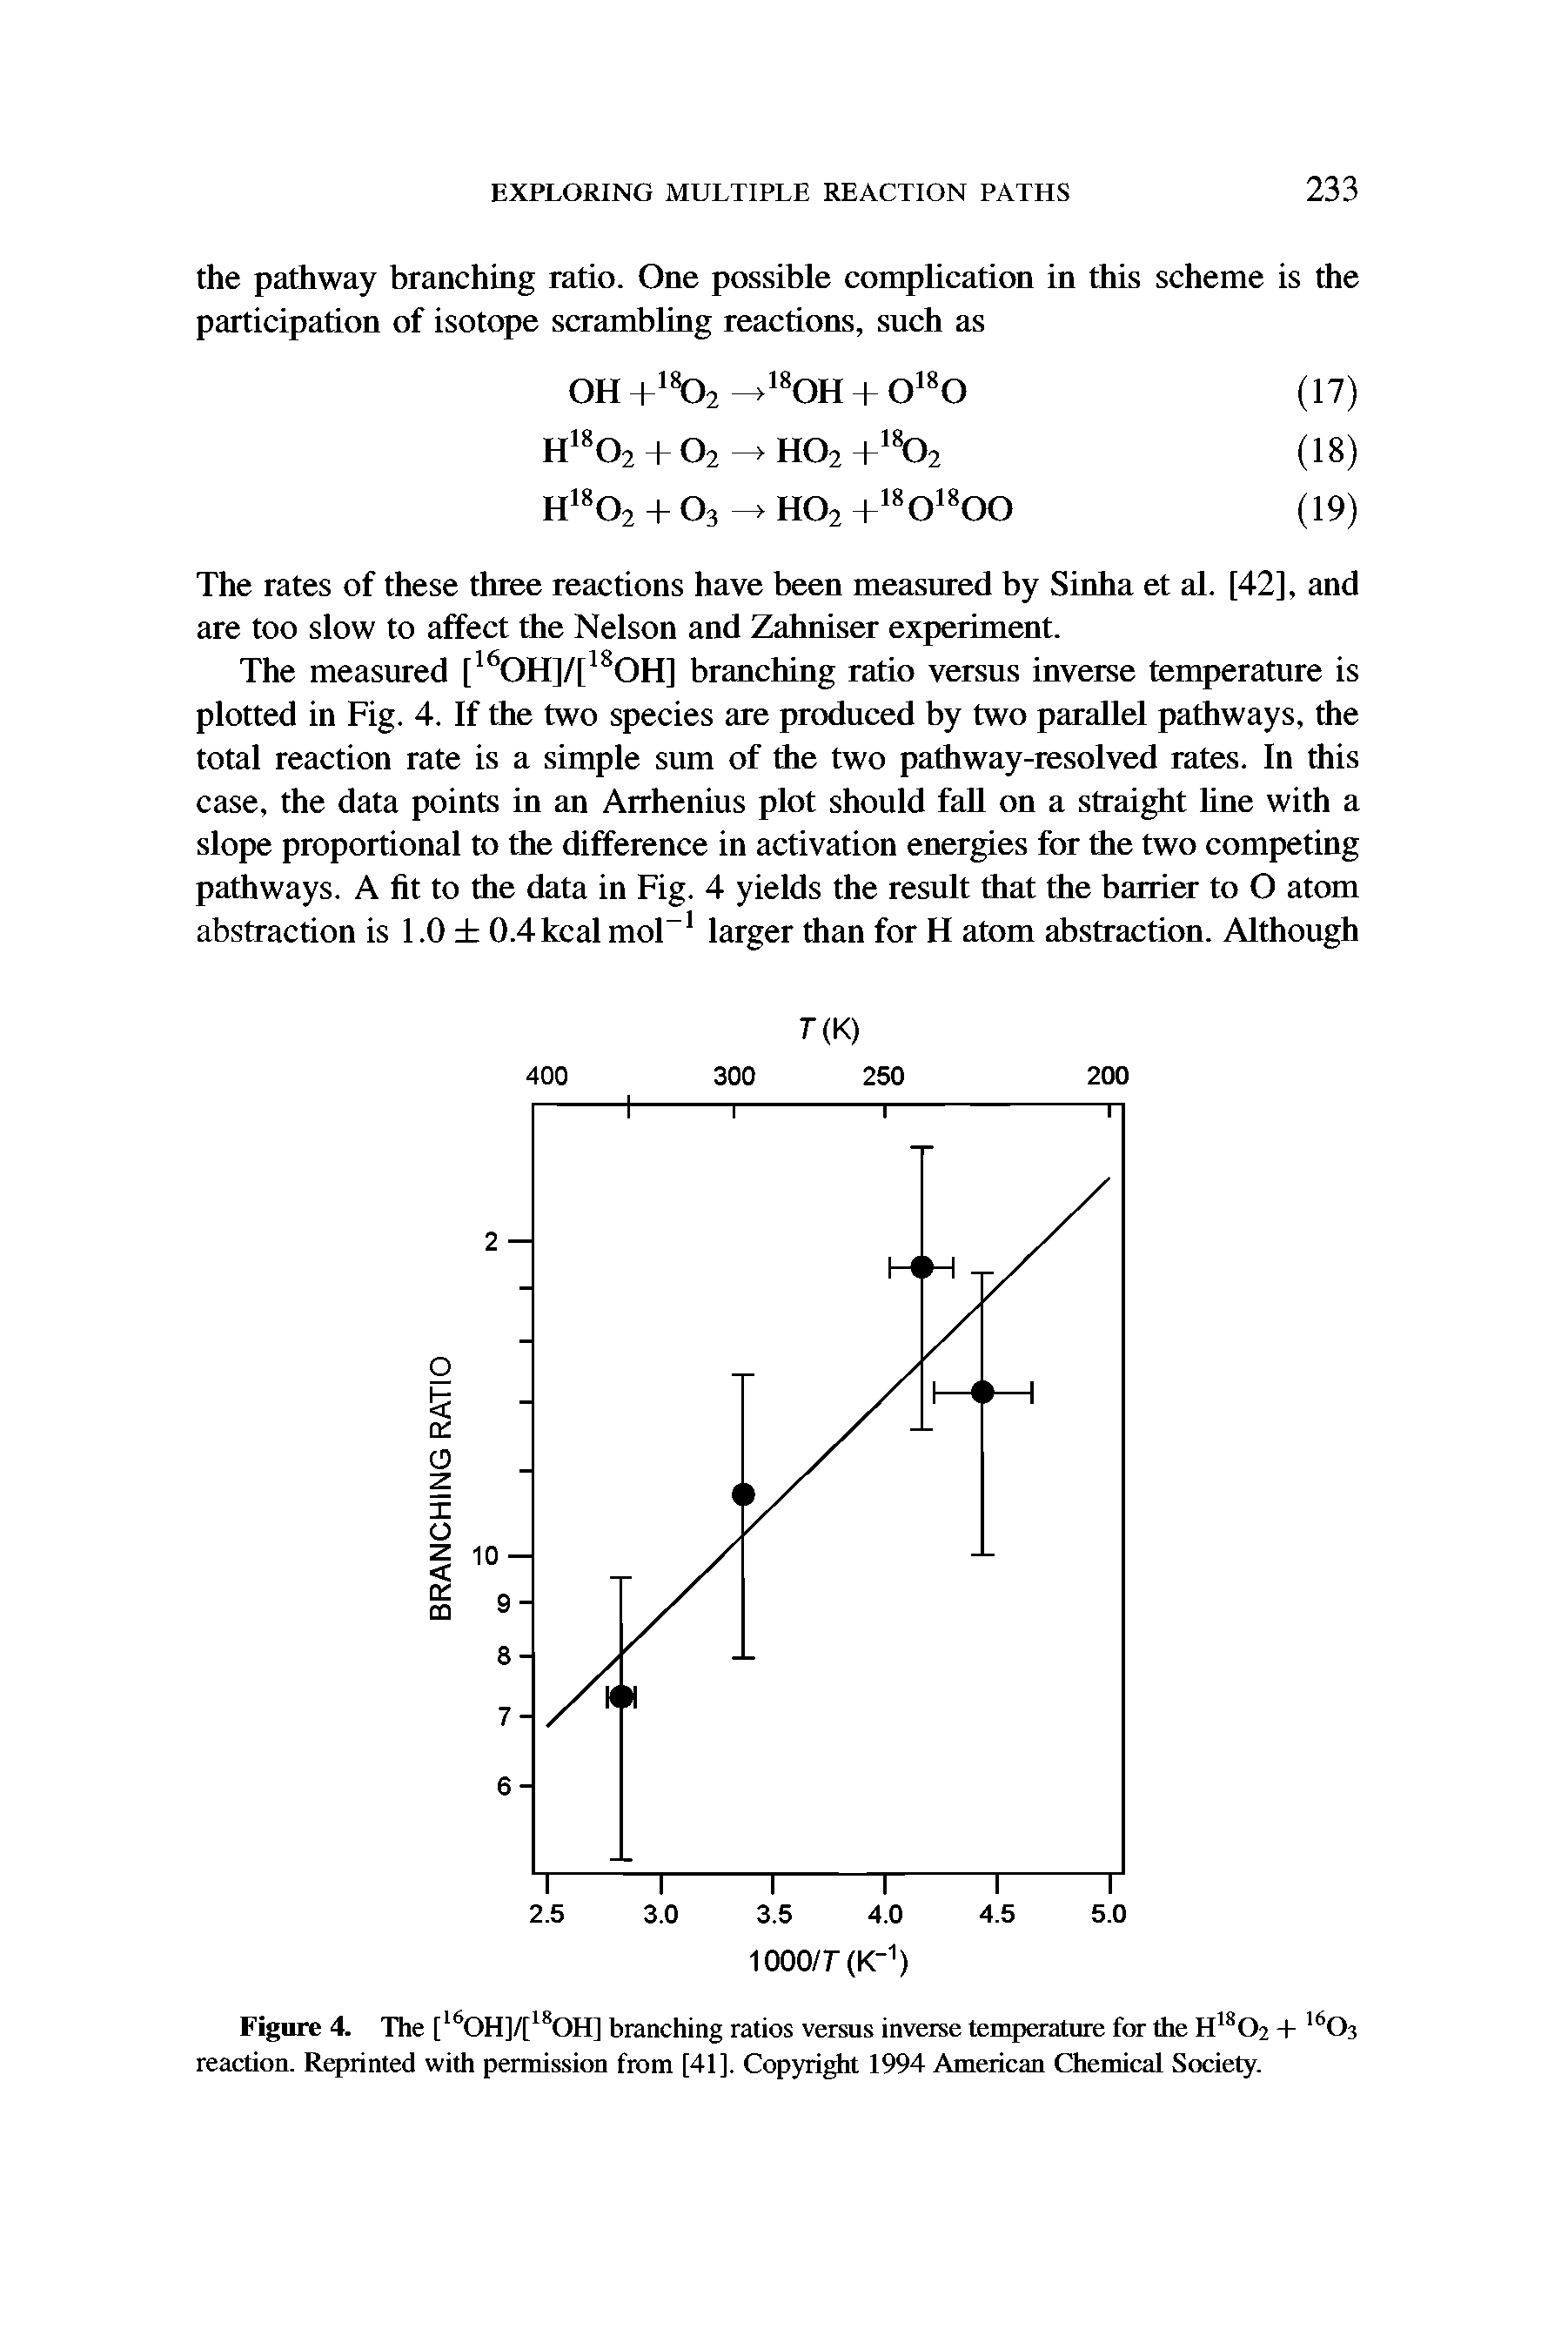 Figure 4. The [ OH]/[ OH] branching ratios versus inverse temperature for the H 02 + reaction. Reprinted with permission from [41]. Copyright 1994 American Chemical Society.